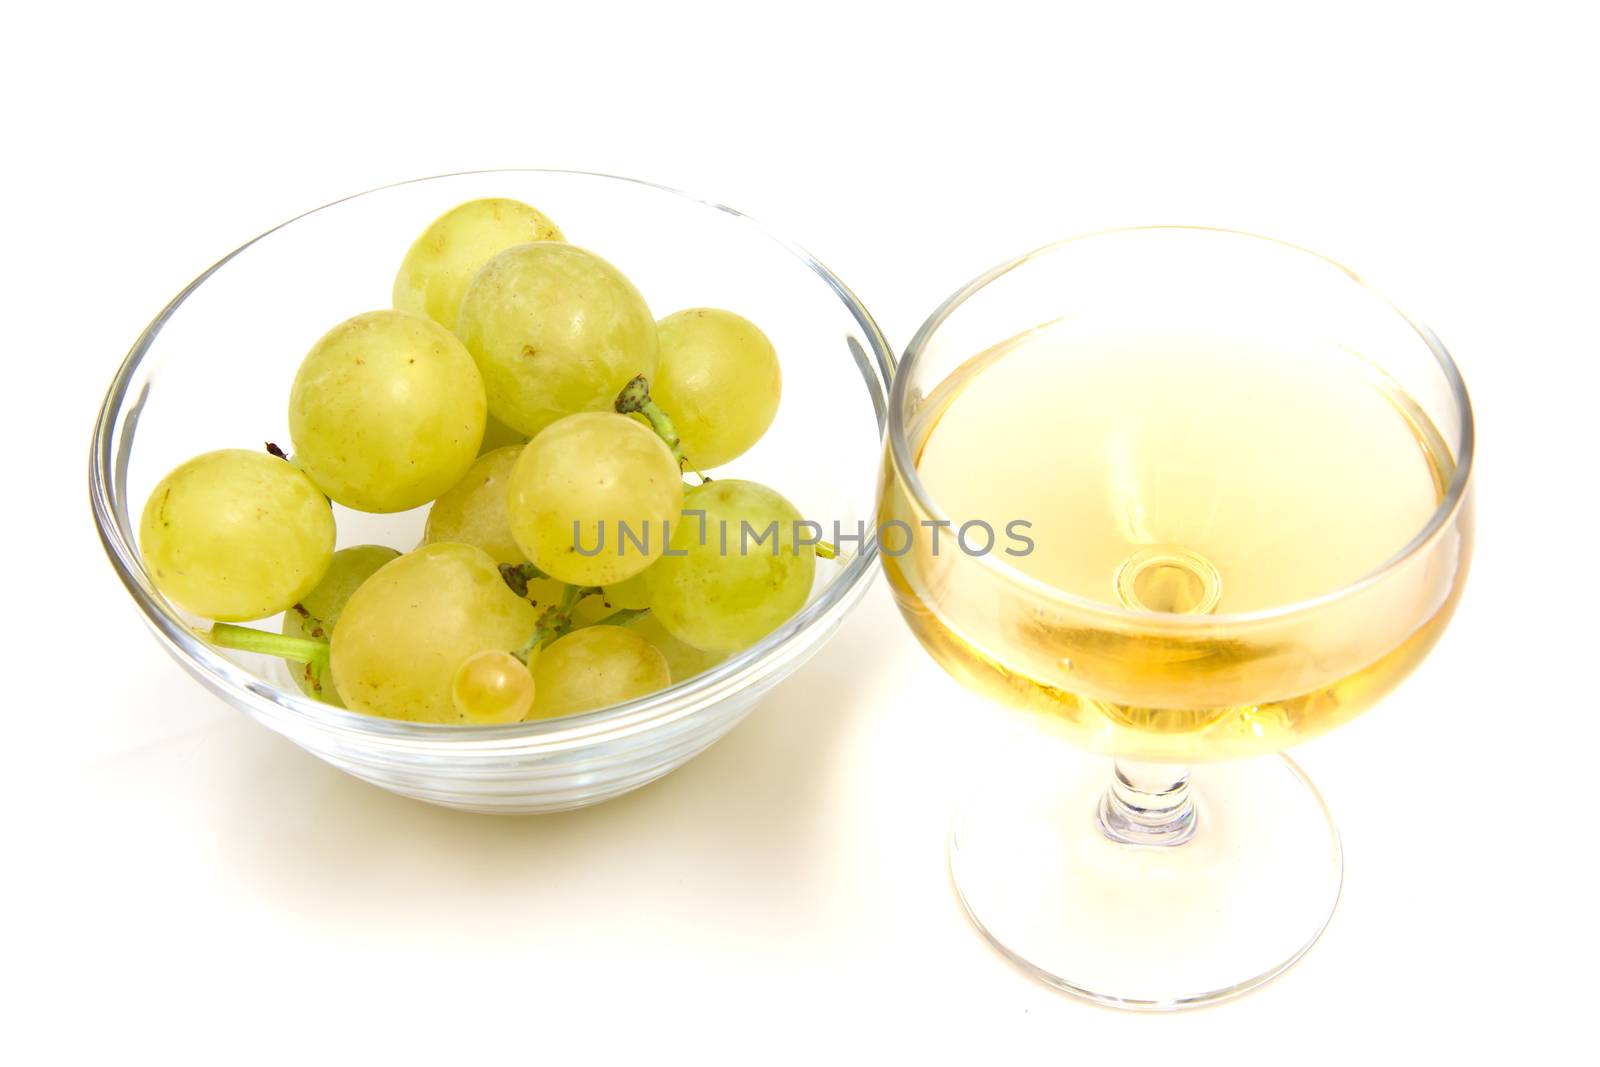 Glass of wine and grapes on bowl on white background